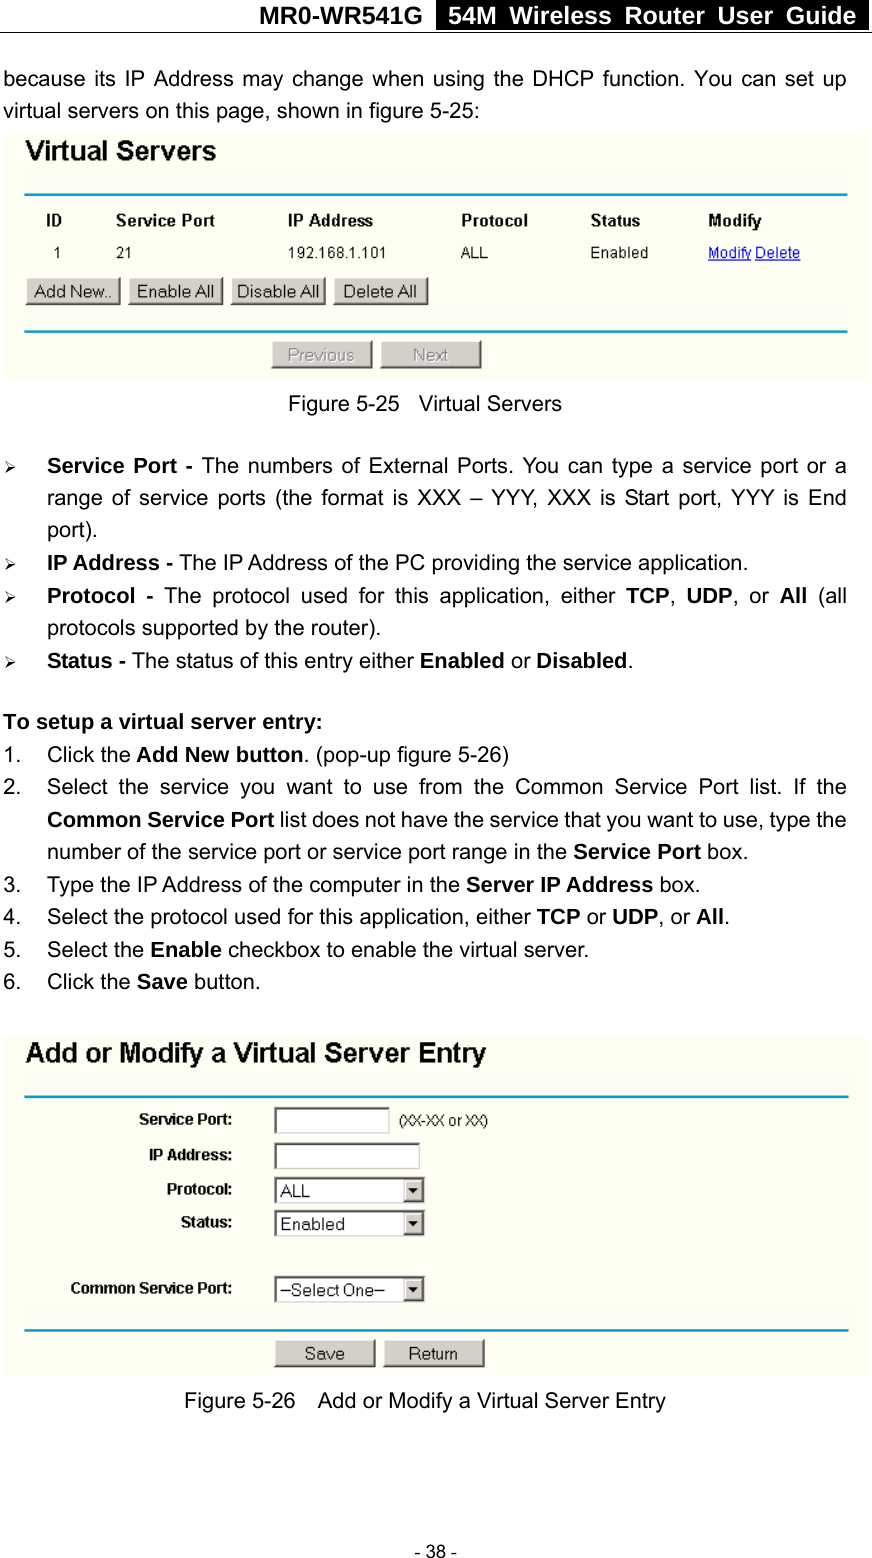 MR0-WR541G   54M Wireless Router User Guide  because its IP Address may change when using the DHCP function. You can set up virtual servers on this page, shown in figure 5-25:  Figure 5-25  Virtual Servers ¾ Service Port - The numbers of External Ports. You can type a service port or a range of service ports (the format is XXX – YYY, XXX is Start port, YYY is End port).  ¾ IP Address - The IP Address of the PC providing the service application. ¾ Protocol - The protocol used for this application, either TCP,  UDP, or All  (all protocols supported by the router). ¾ Status - The status of this entry either Enabled or Disabled. To setup a virtual server entry:   1. Click the Add New button. (pop-up figure 5-26) 2.  Select the service you want to use from the Common Service Port list. If the Common Service Port list does not have the service that you want to use, type the number of the service port or service port range in the Service Port box. 3.  Type the IP Address of the computer in the Server IP Address box.  4.  Select the protocol used for this application, either TCP or UDP, or All. 5. Select the Enable checkbox to enable the virtual server. 6. Click the Save button.    Figure 5-26    Add or Modify a Virtual Server Entry  - 38 - 